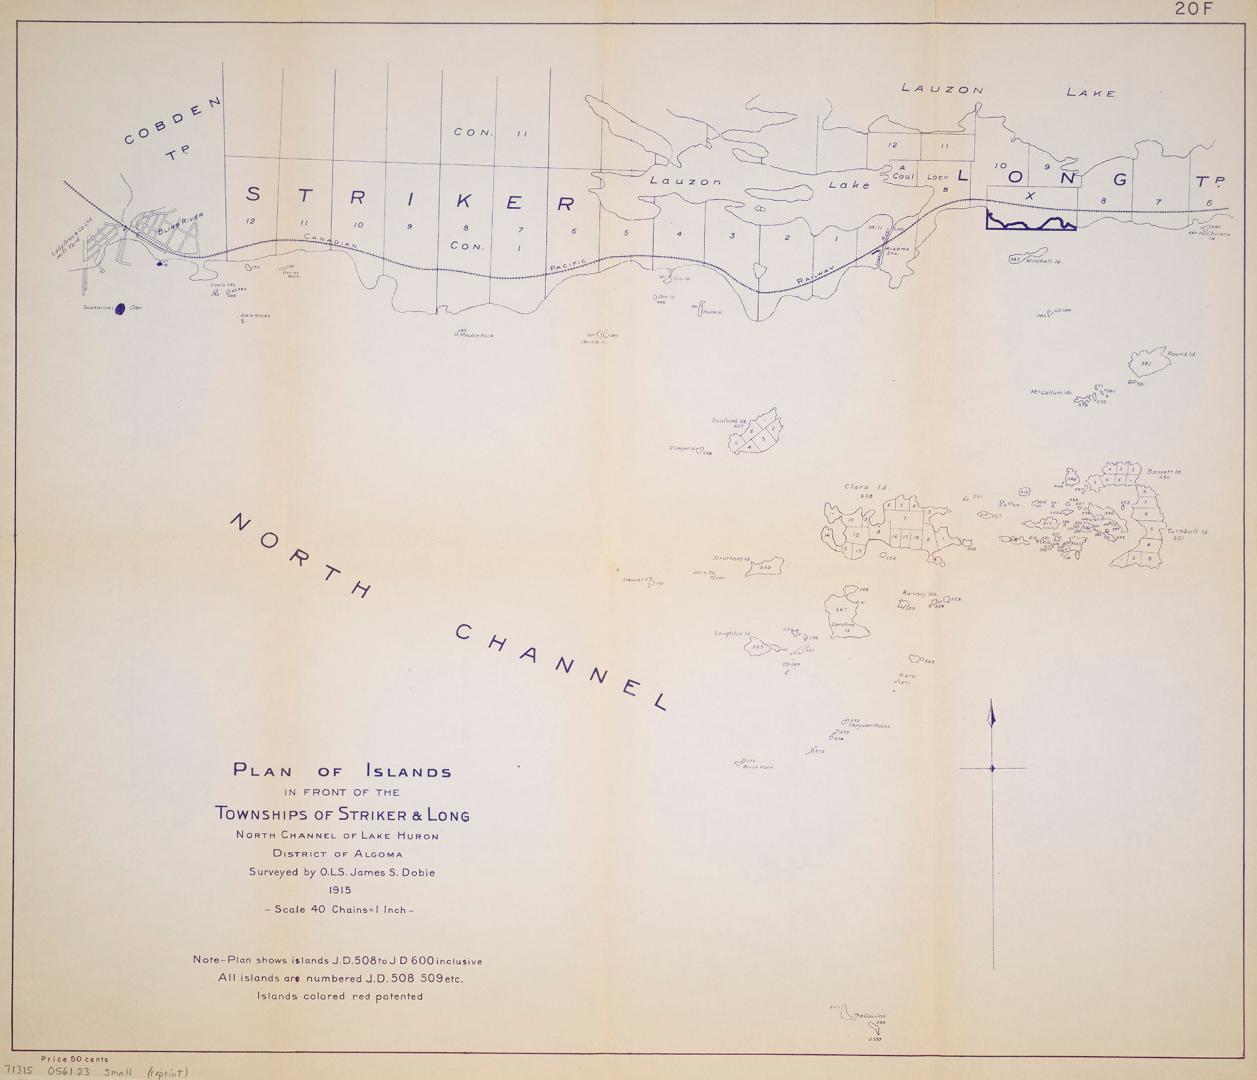 Plan of islands in front of the townships of Striker & Long north channel of Lake Huron District of Algoma